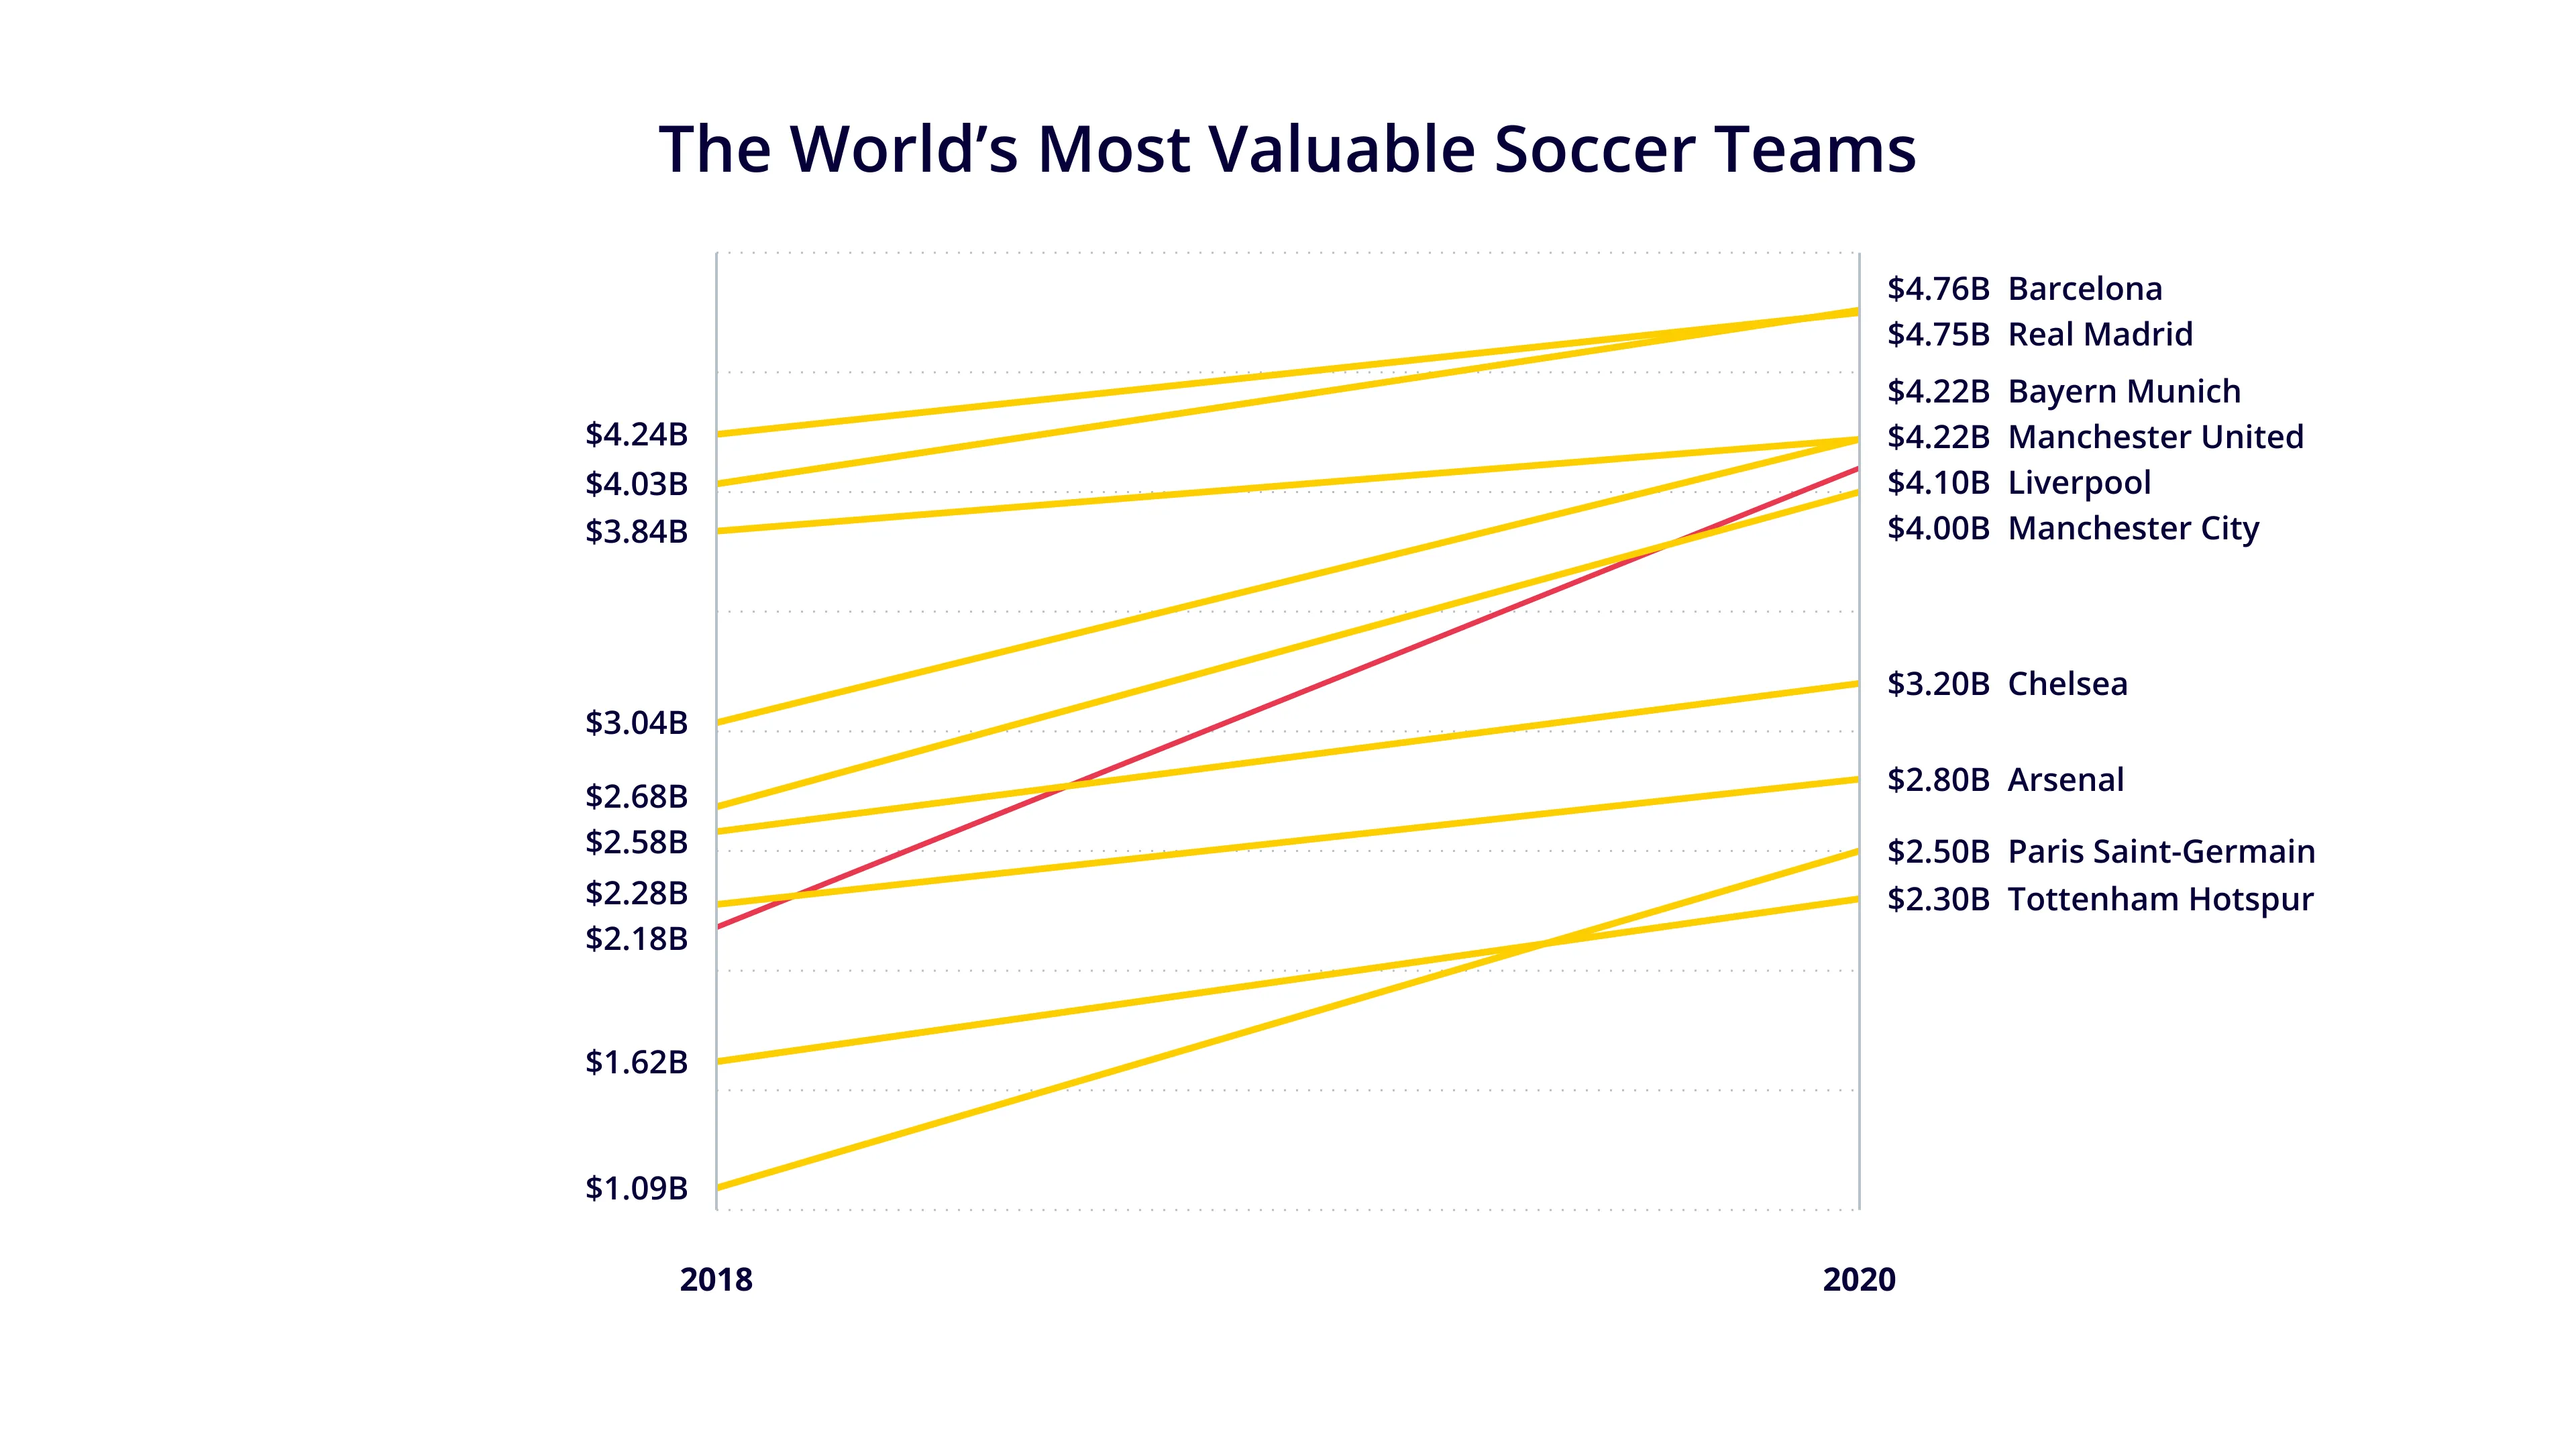 The World’s Most Valuable Soccer Teams